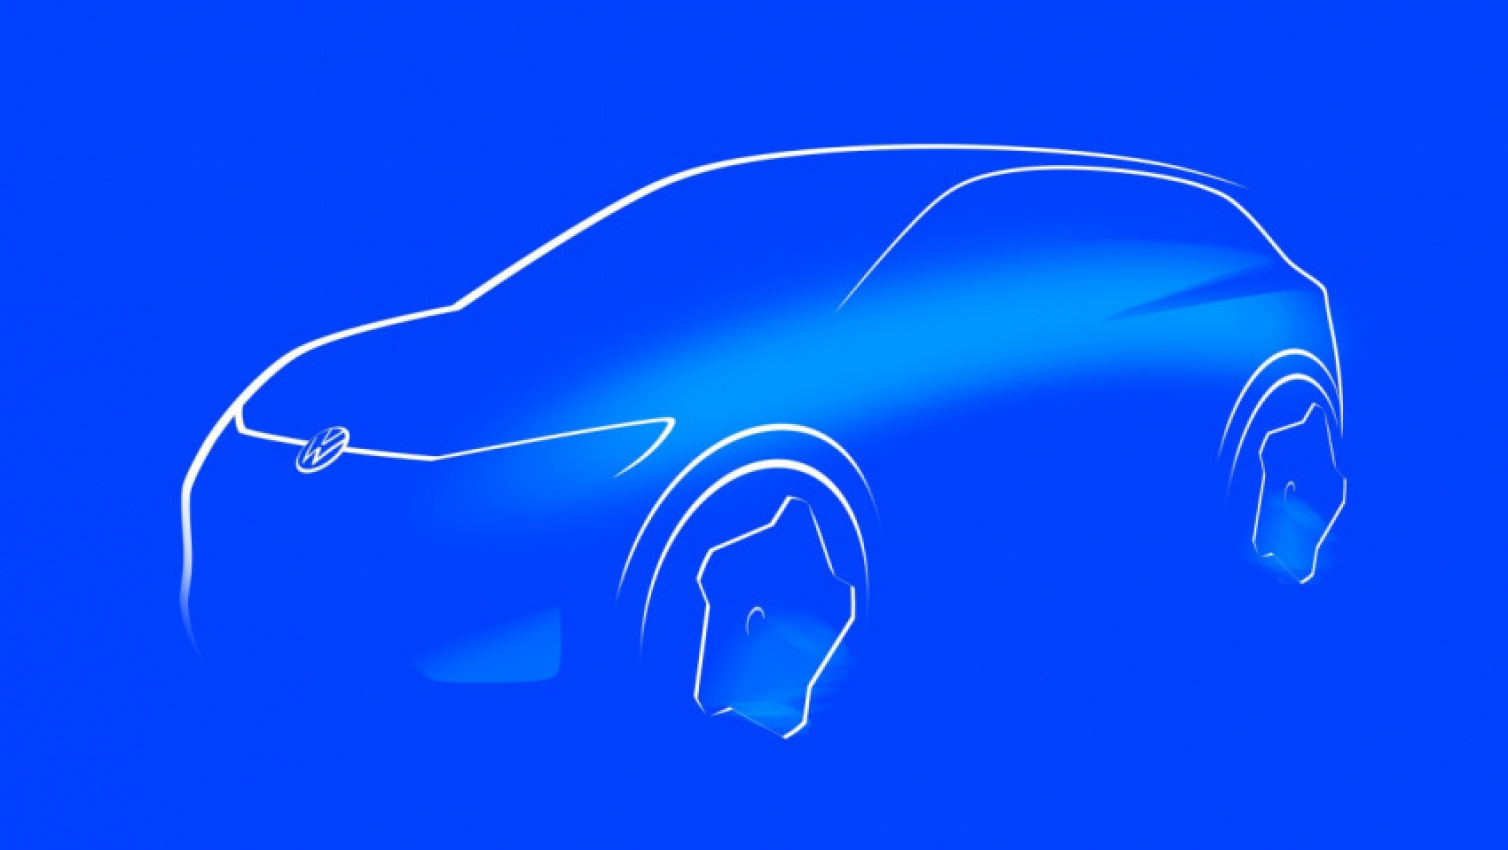 autos, cars, reviews, volkswagen, consumer news, electric cars, volkswagen releases sketches of new 2025 ‘id.1’ electric car